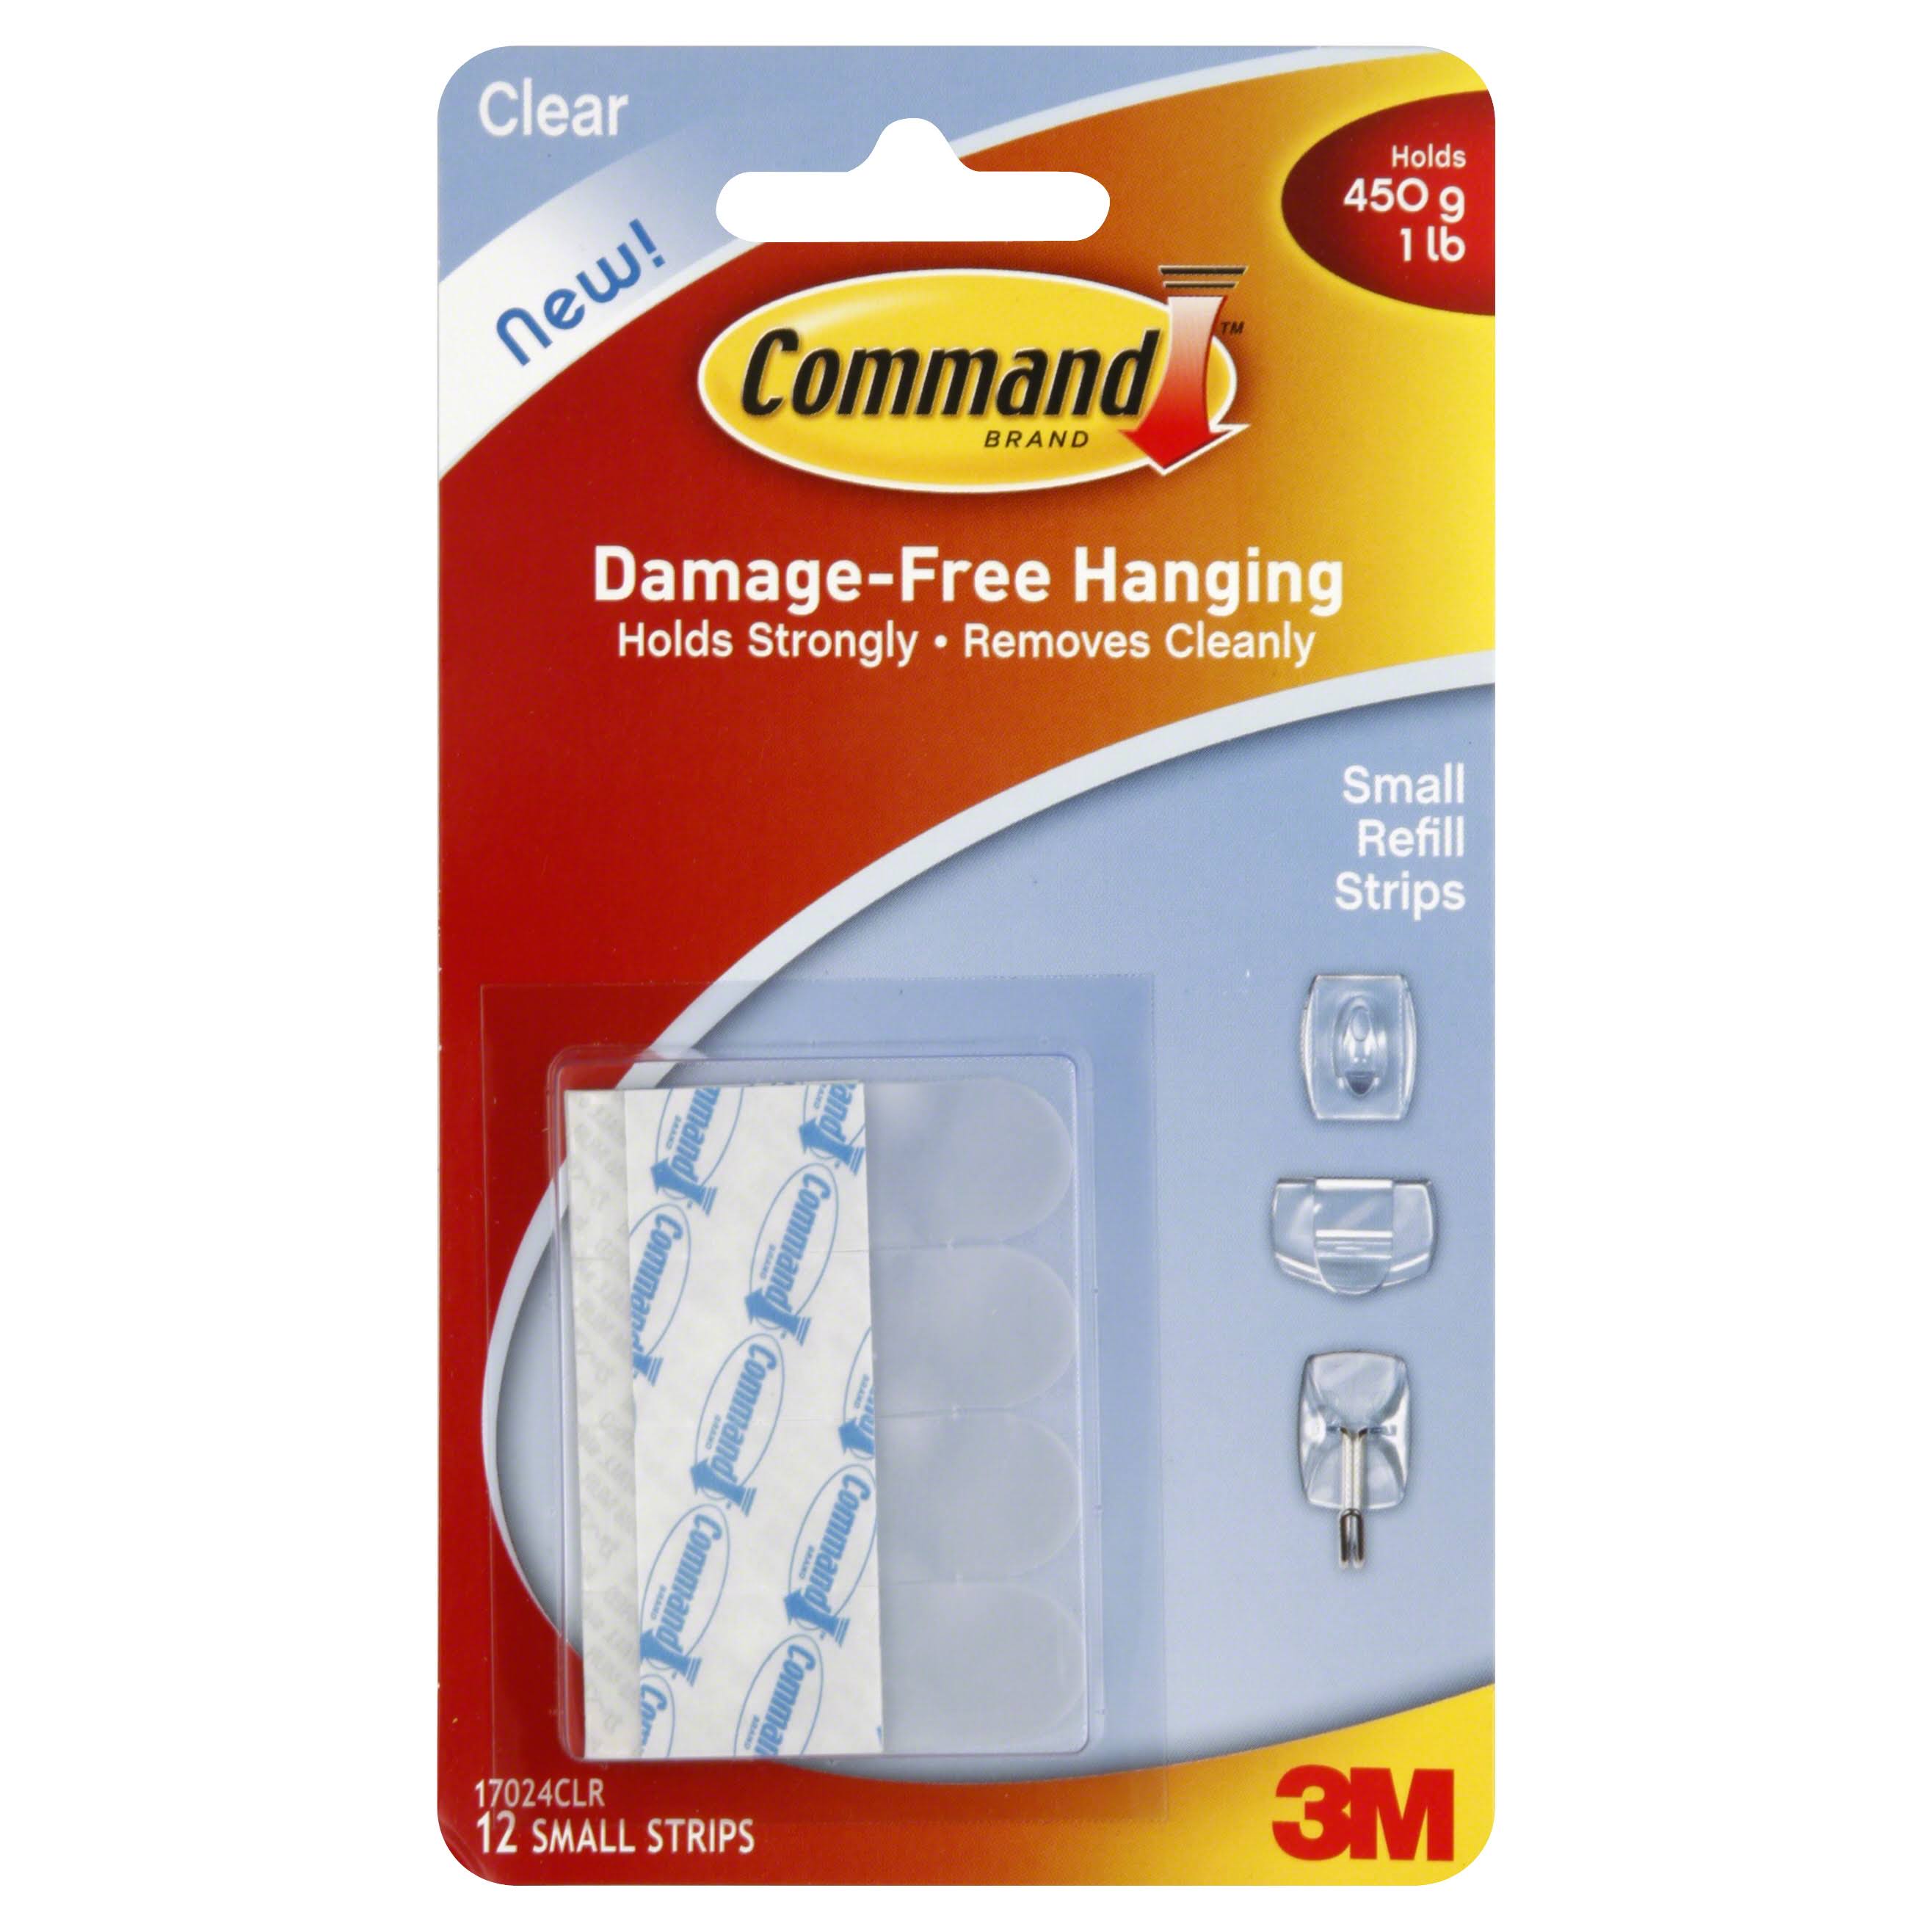 Command Clear Small Refill Strips - 12 Strips